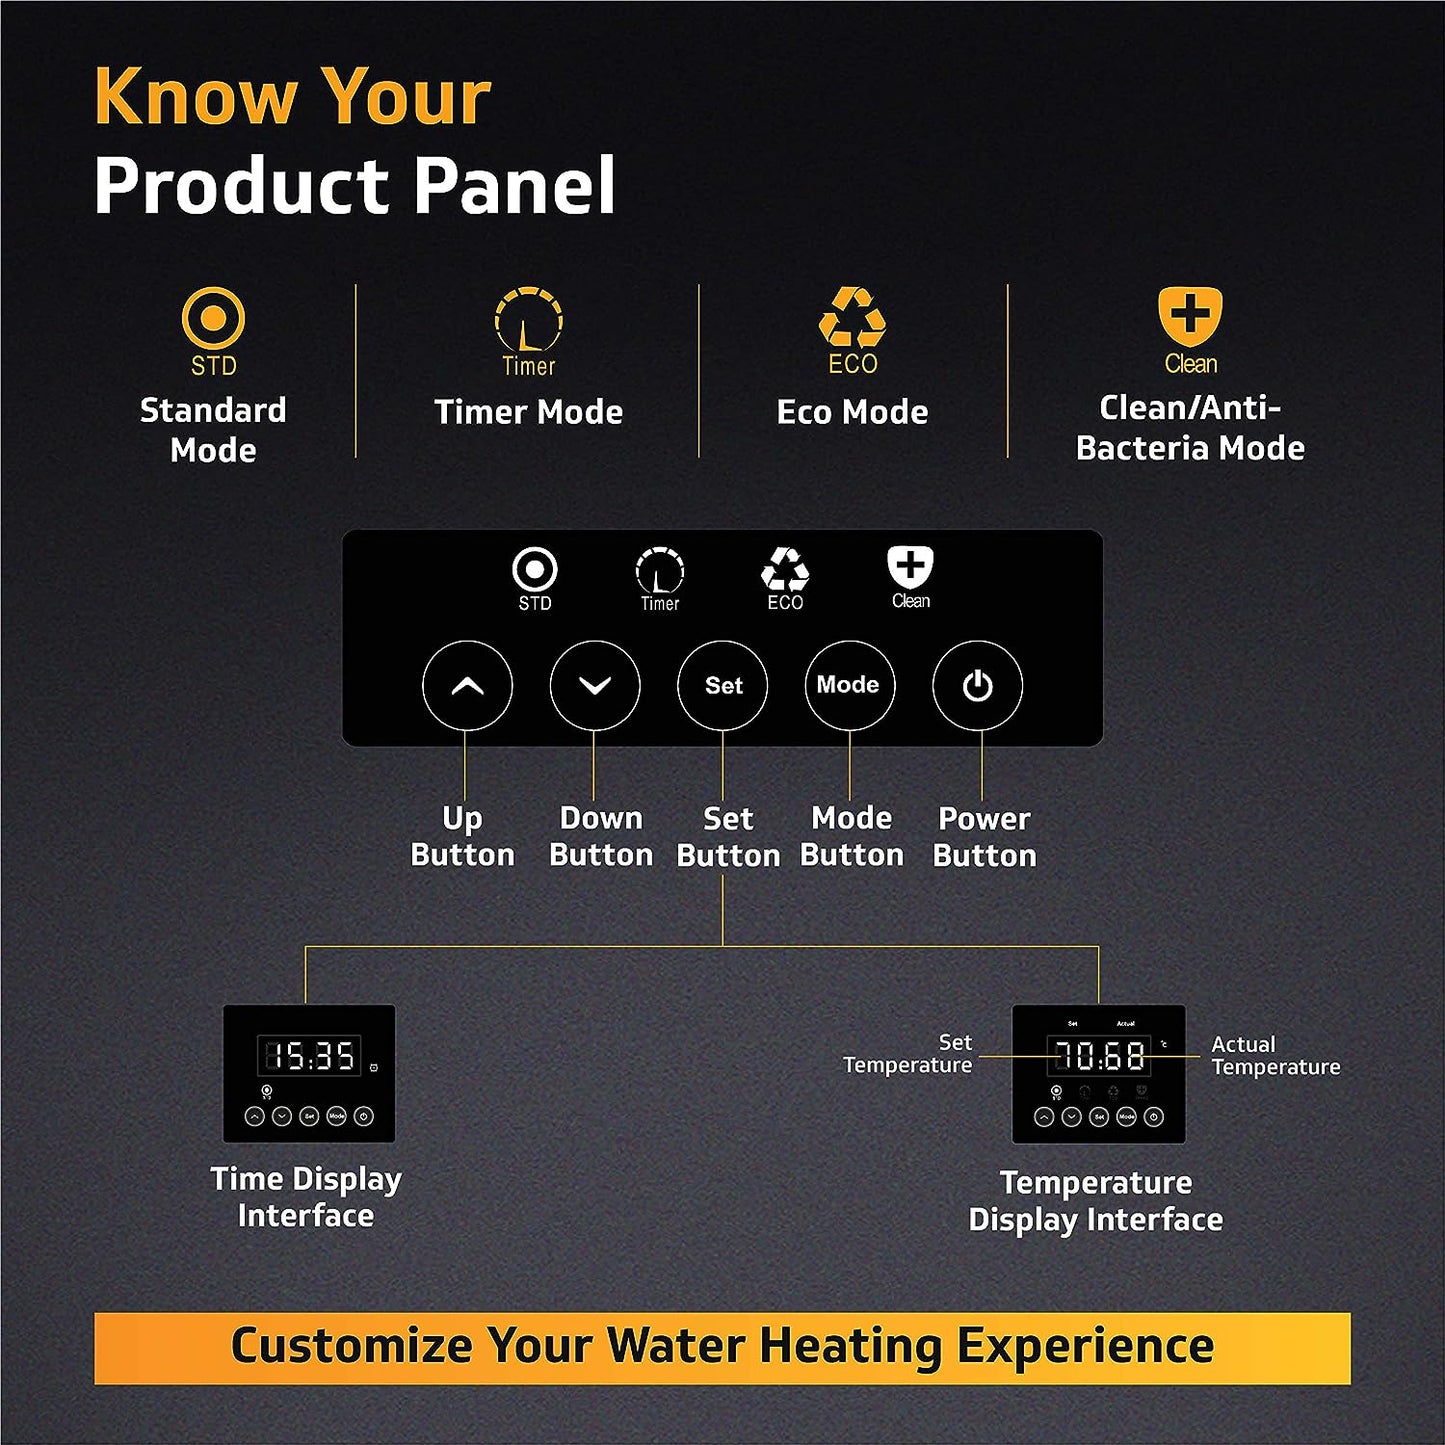 Calino DG 25 L Water Heater with Digital Display, Rust Proof ABS Body and Remote Control